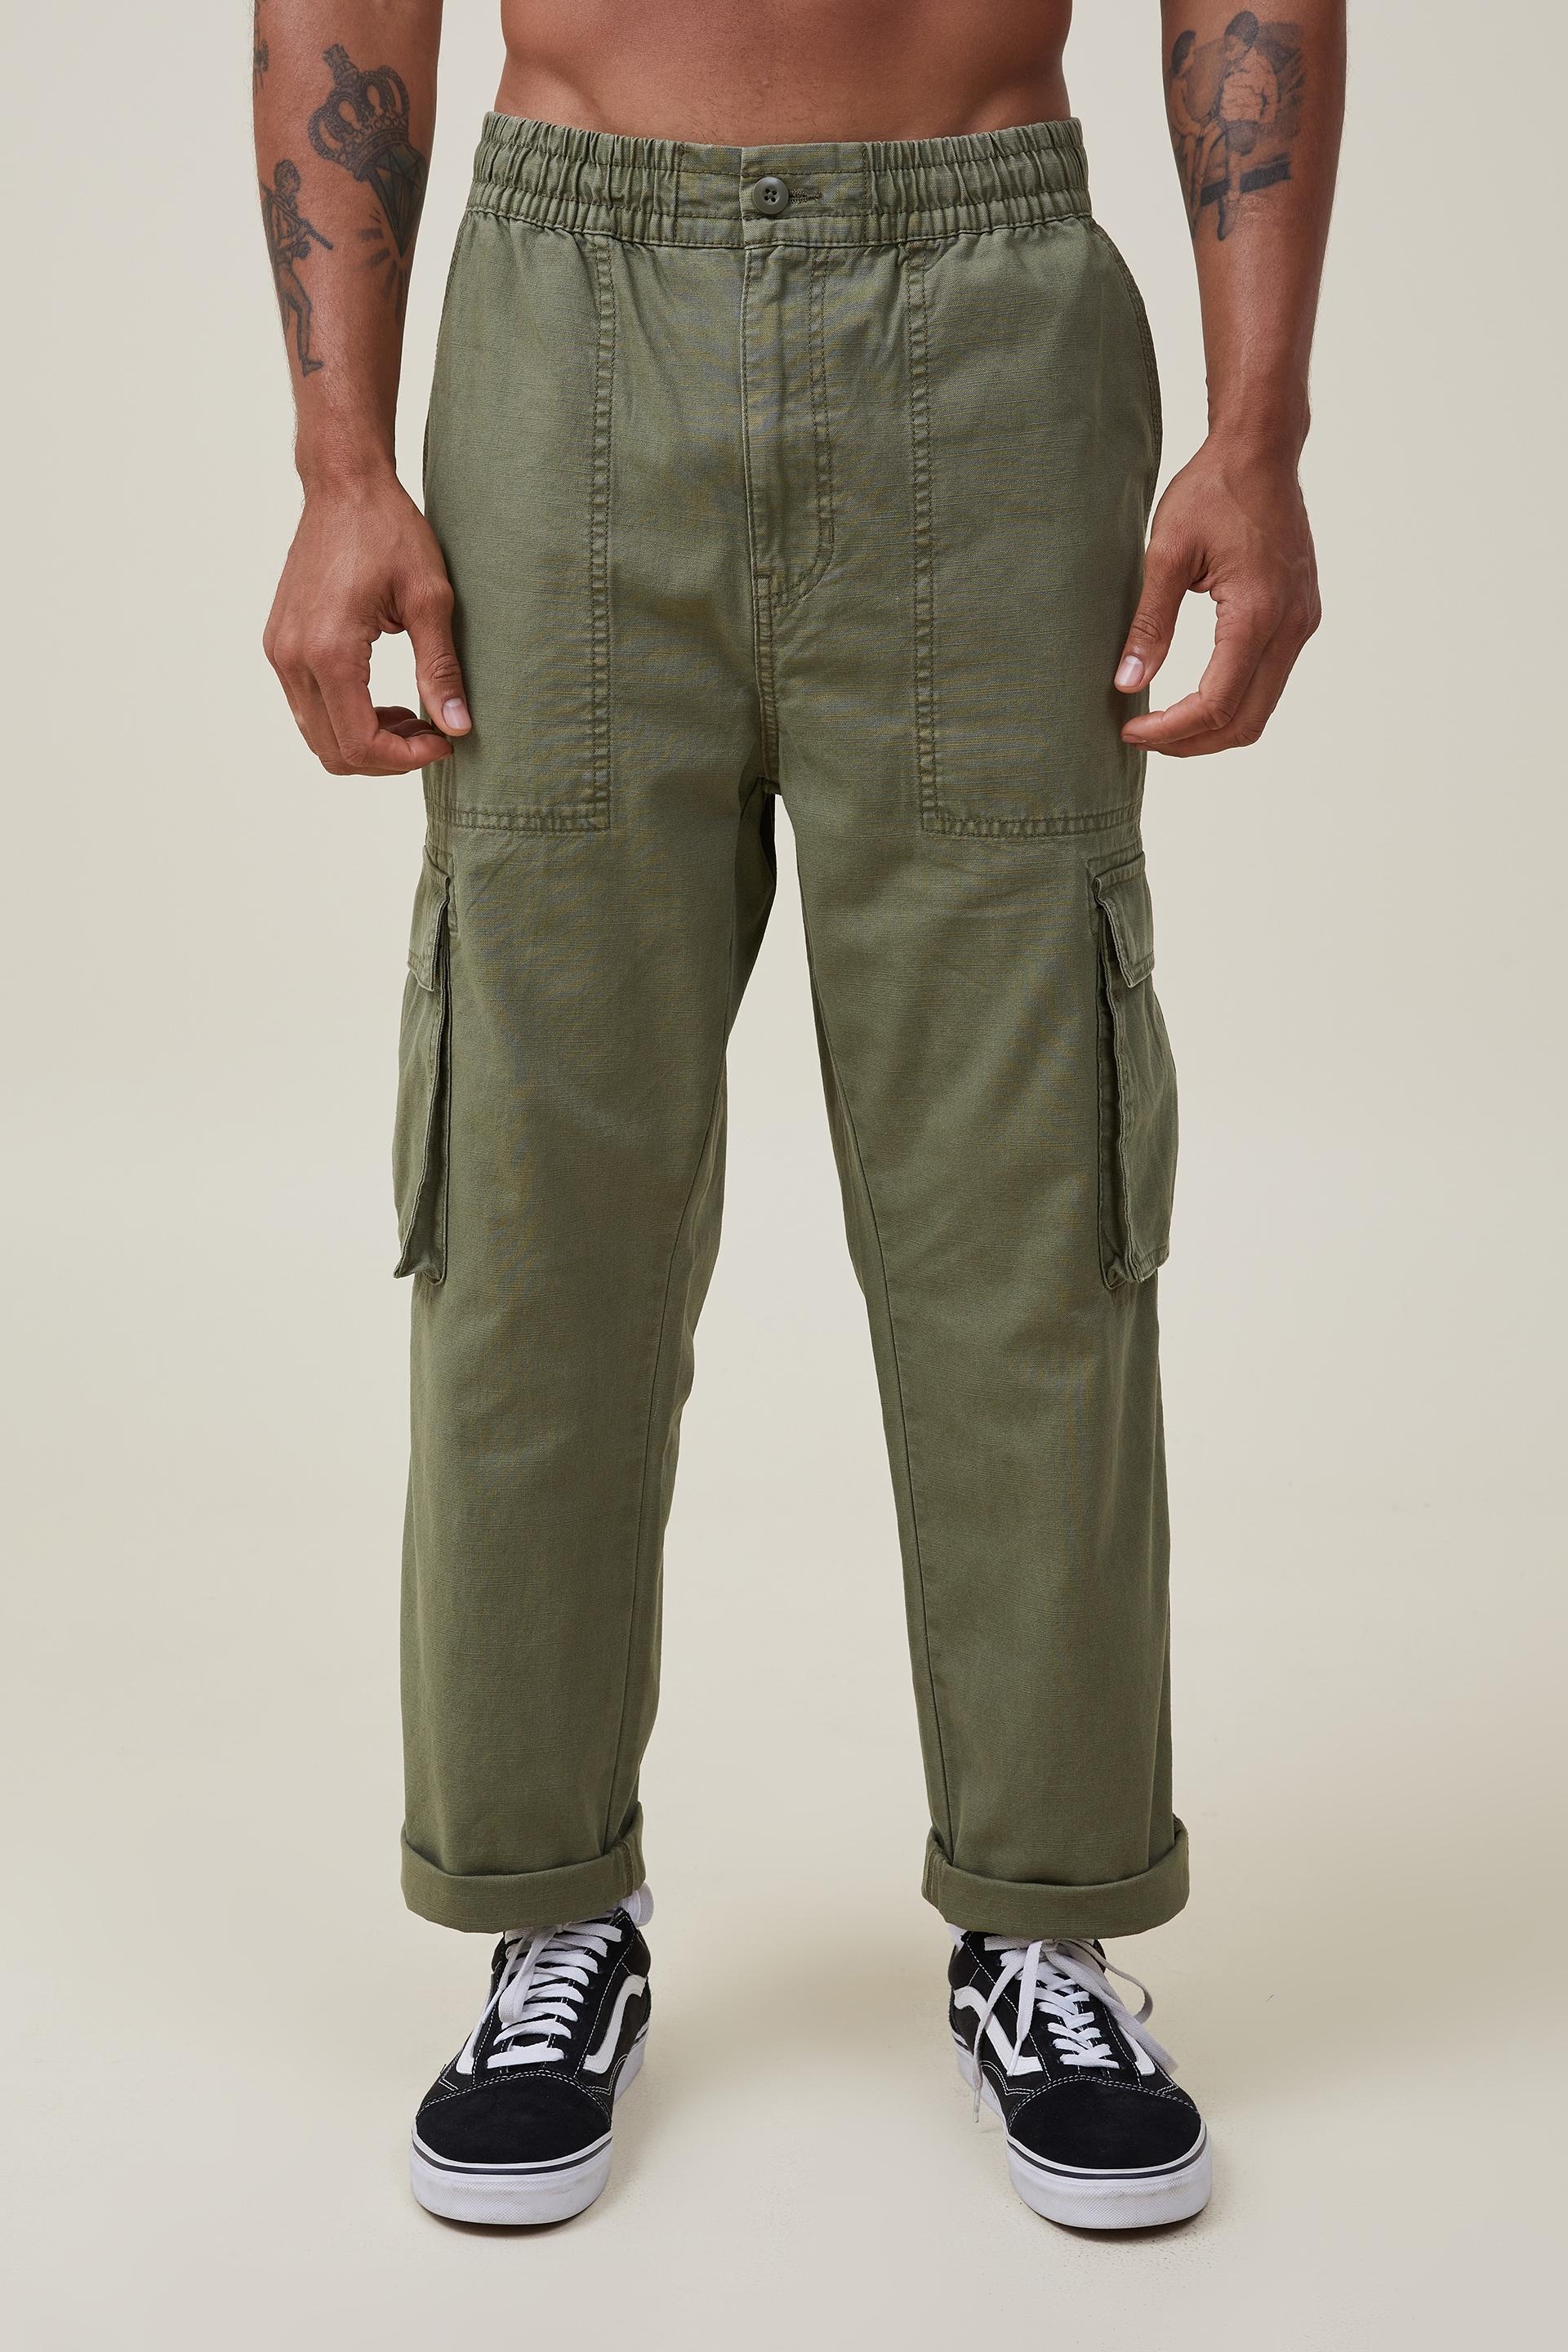 Elastic worker pant - military green cargo Cotton On Pants & Chinos ...